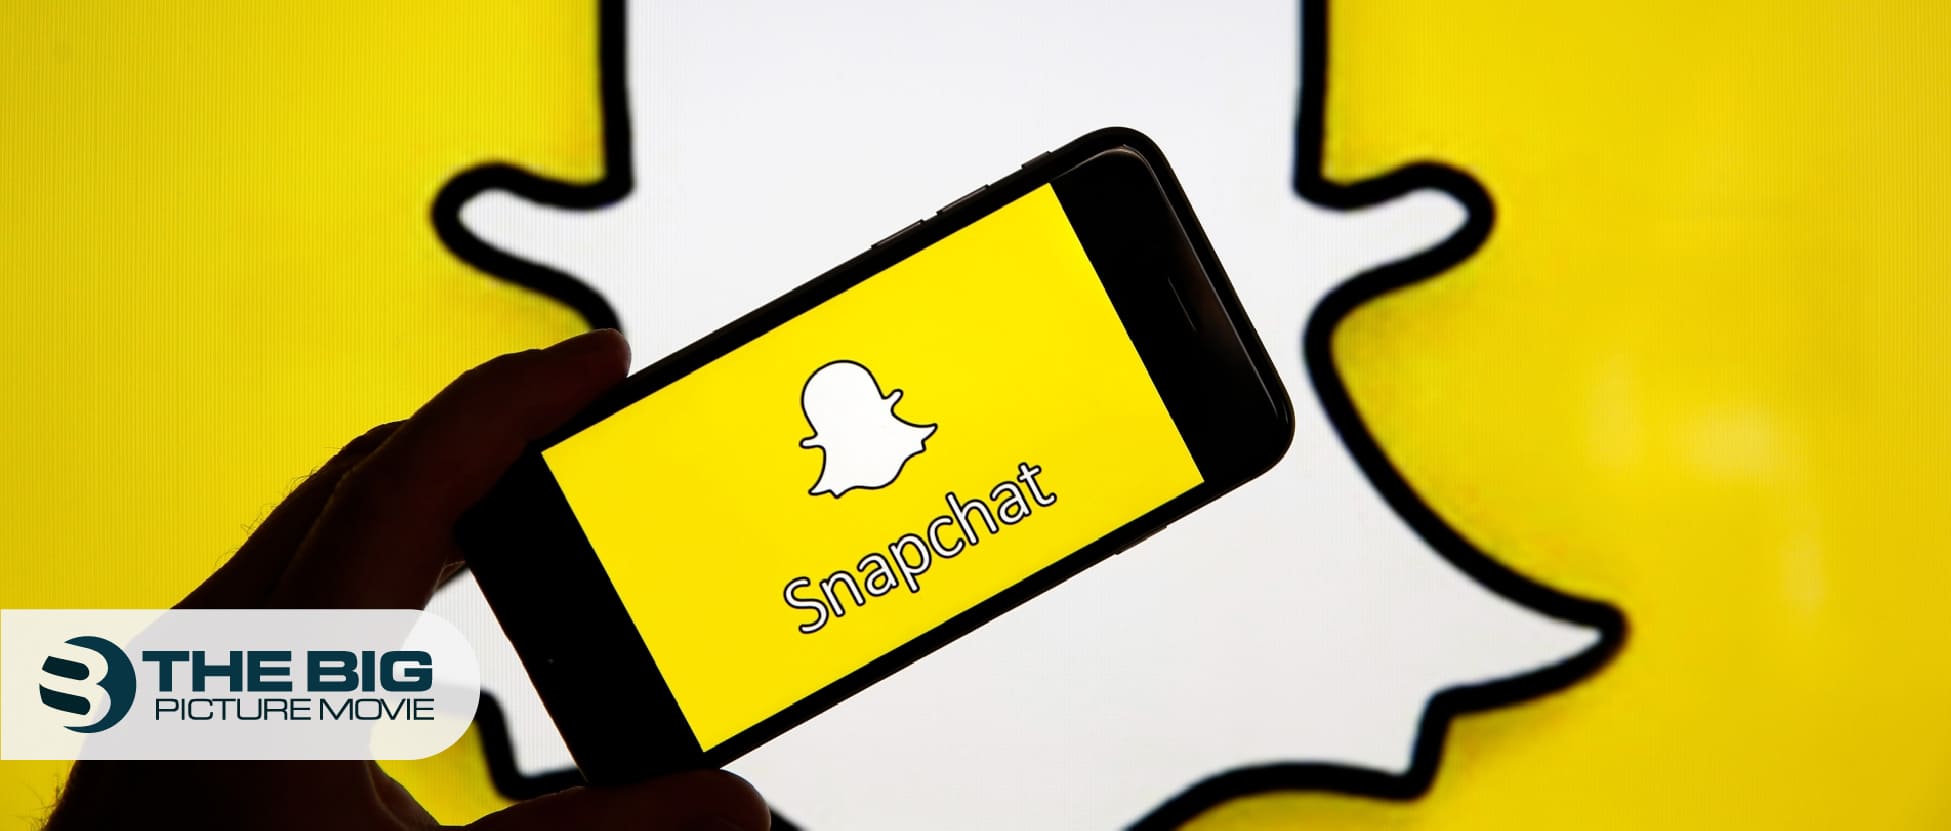 How to Create a Premium Snapchat Account On iOS/iPhone